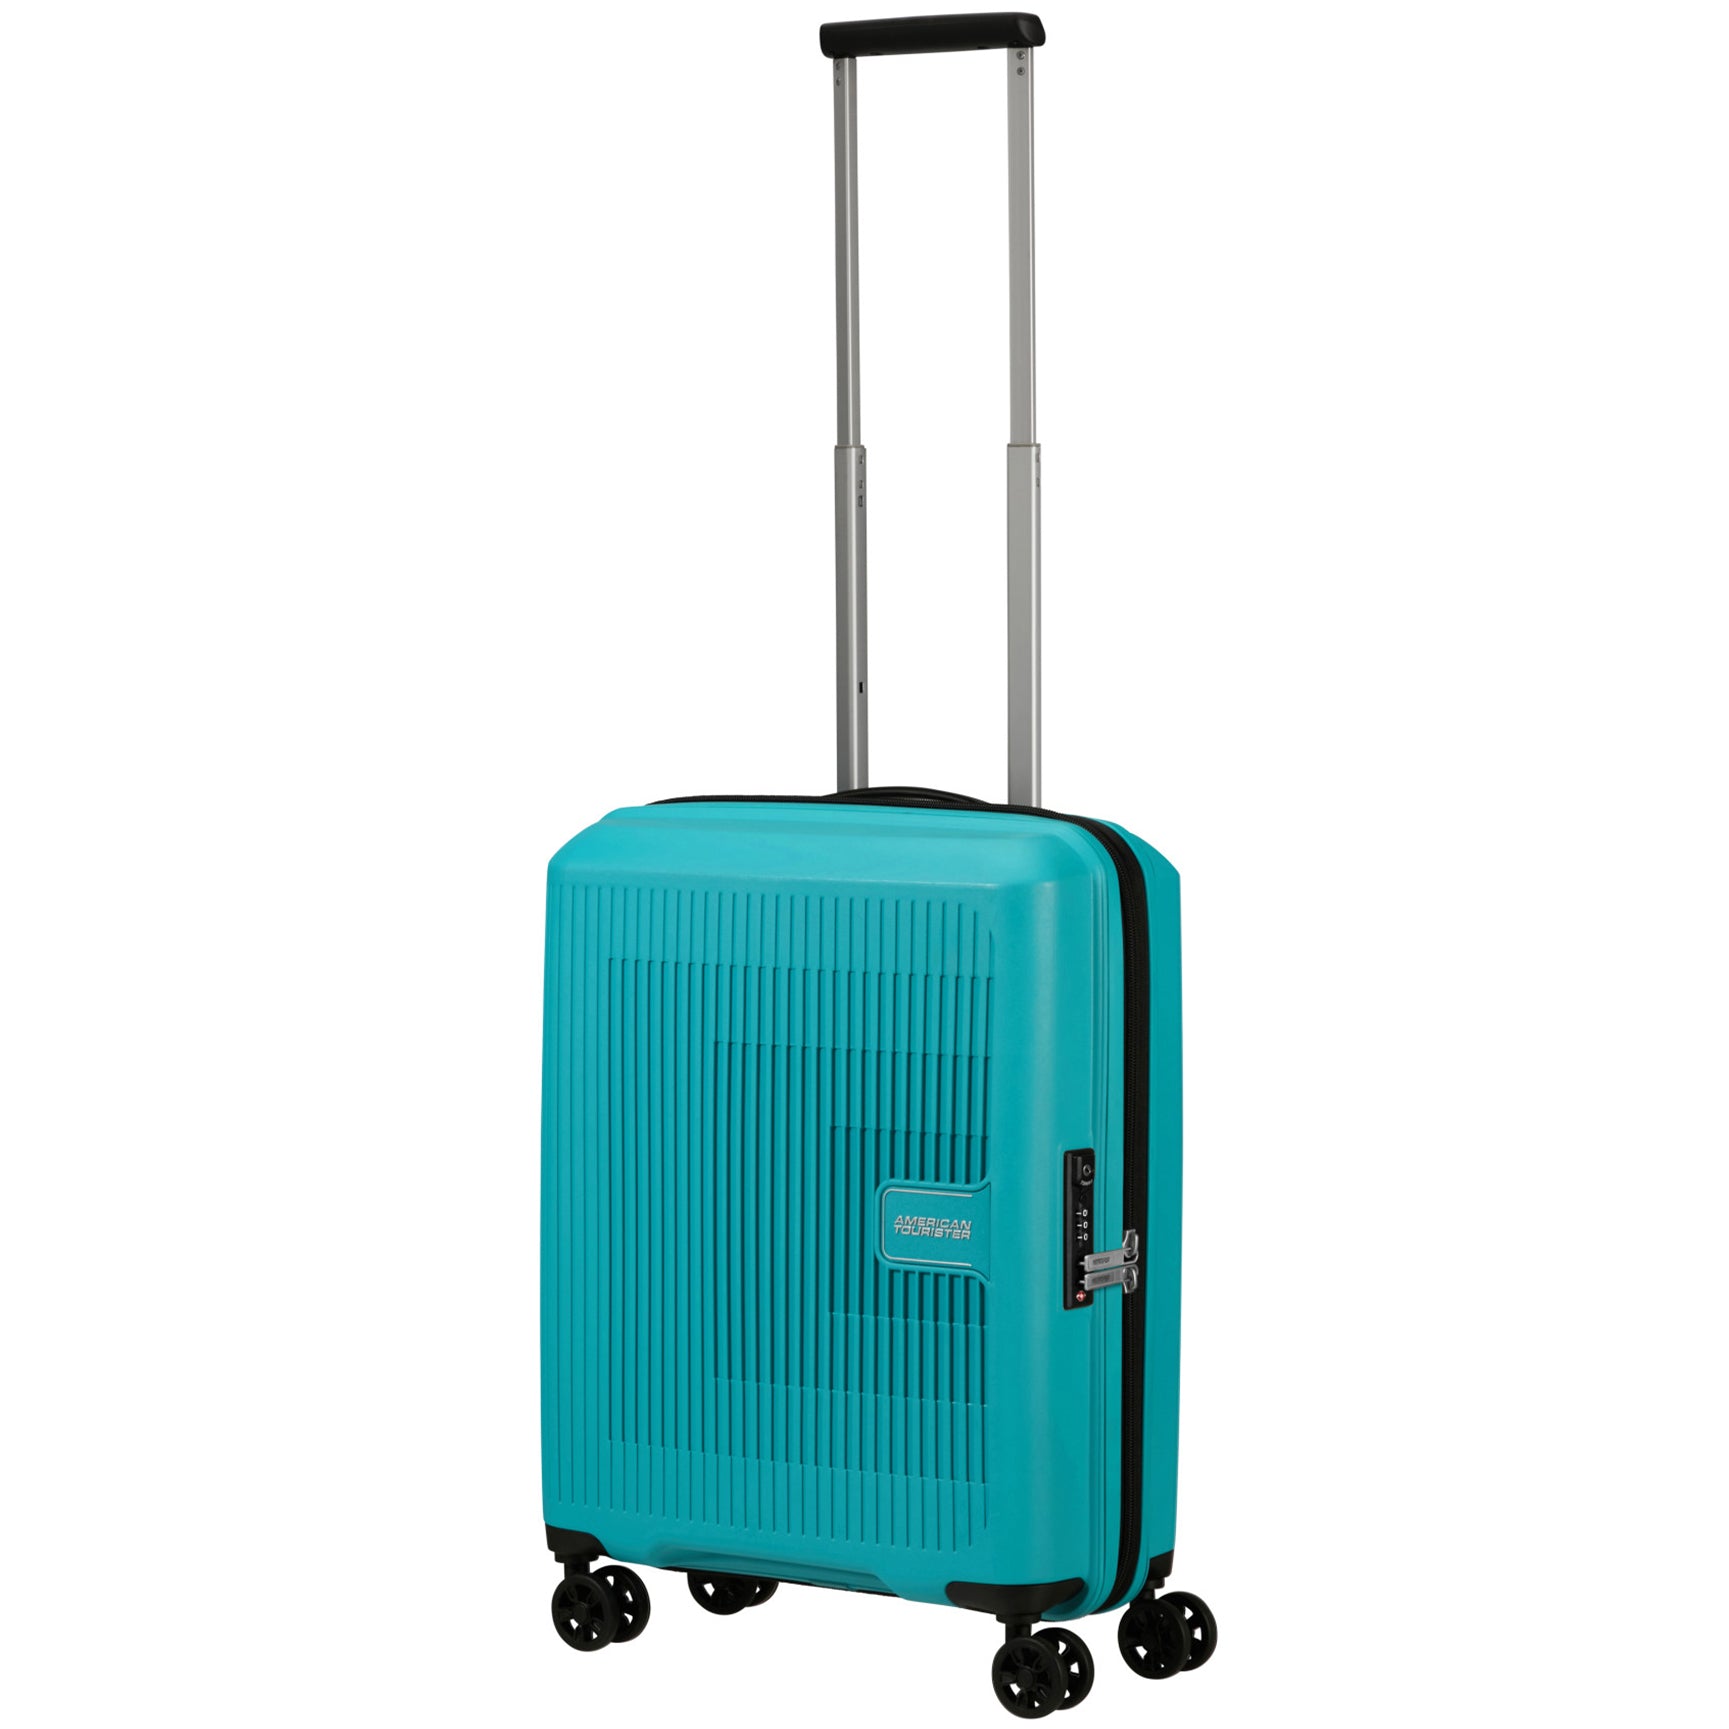 American Tourister Aerostep Spinner 4-Rollen Trolley 55 cm - Turquoise Tonic